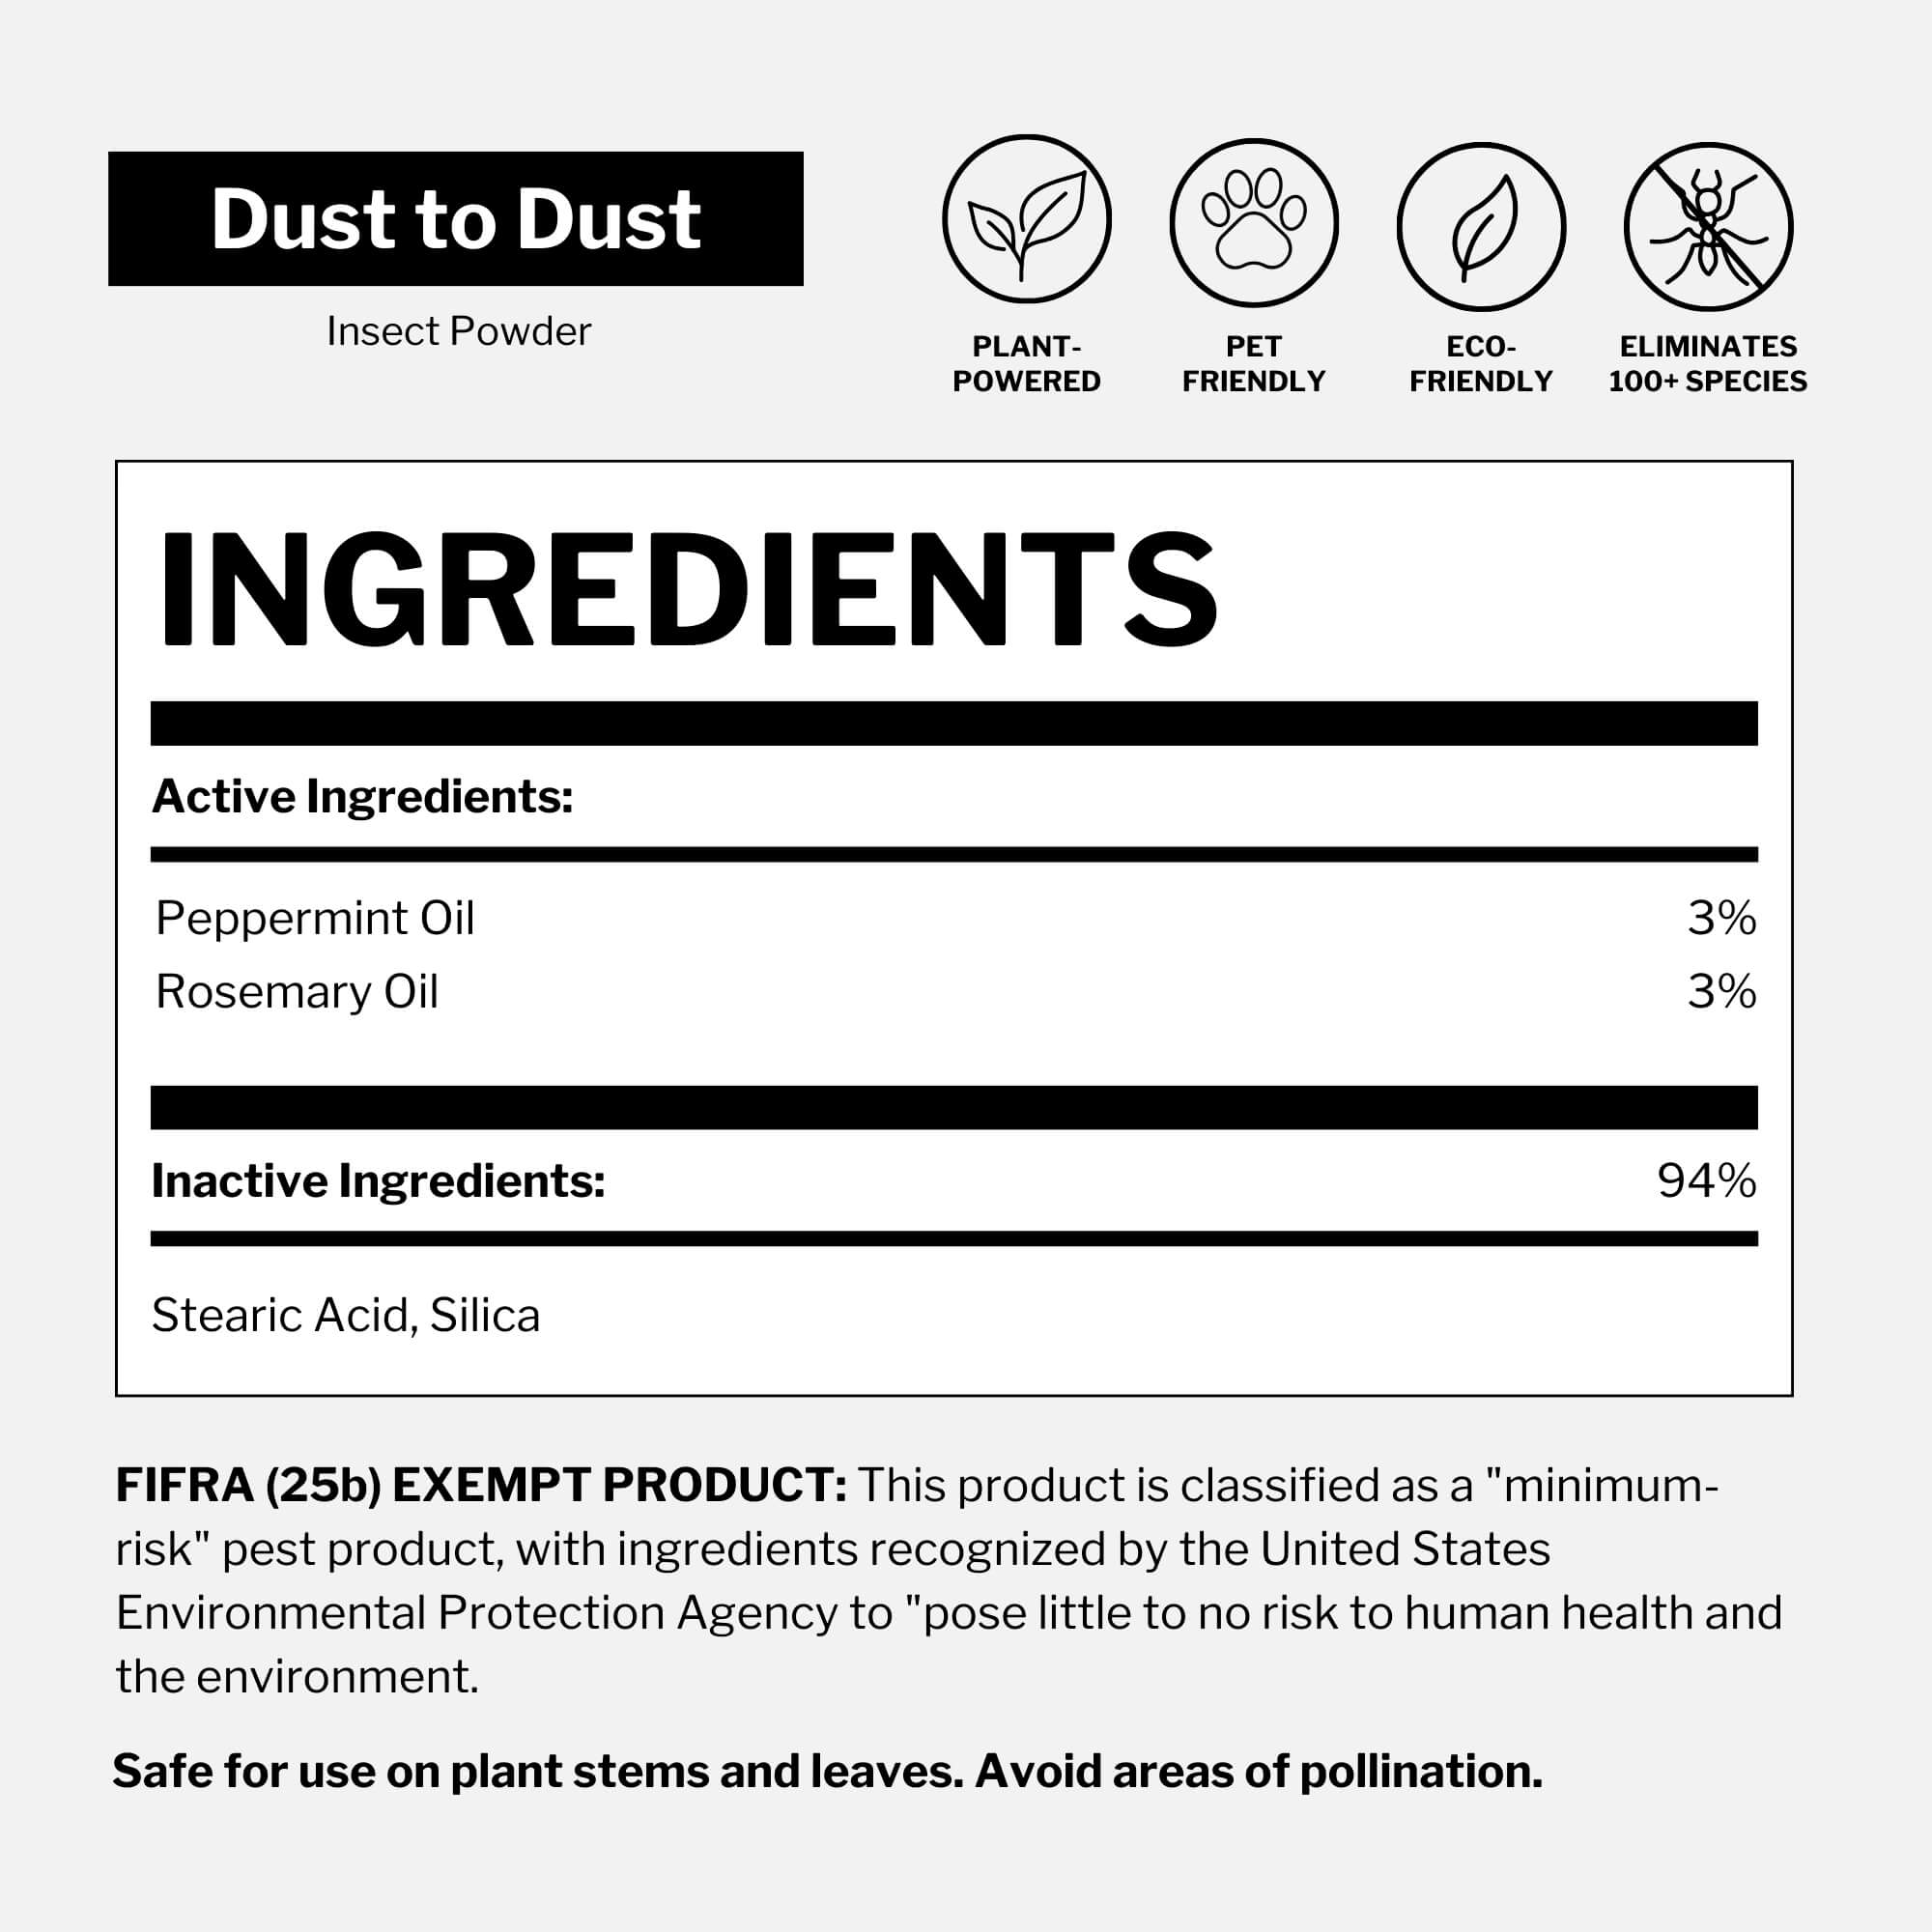 Dust to Dust Plant-Powered Insect Powder